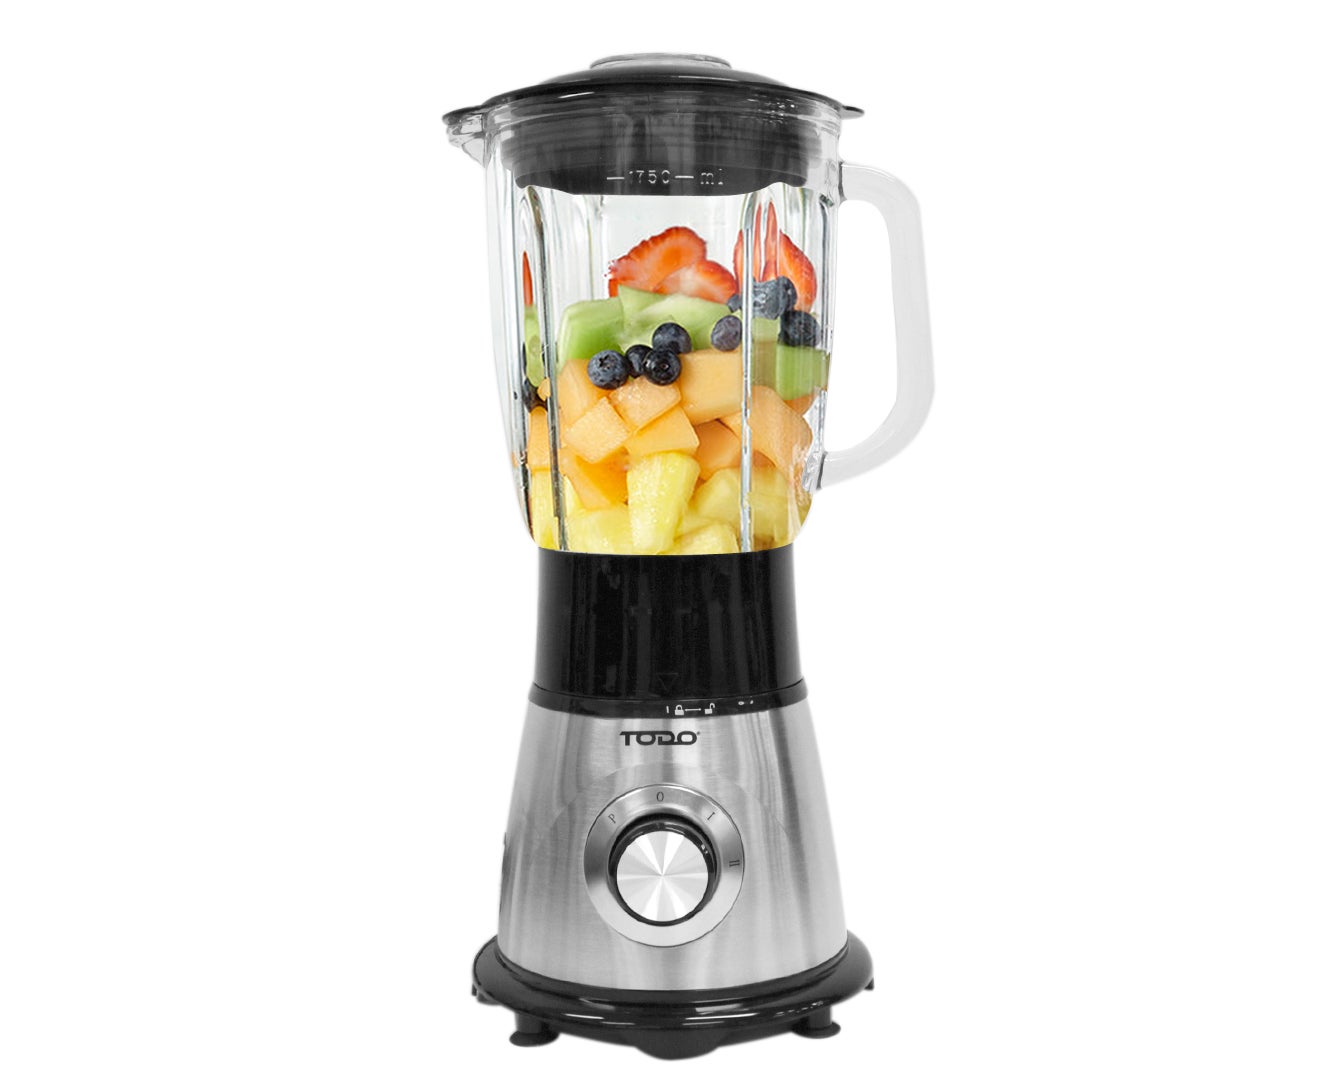 Todo 1 75l Stainless Steel Electric Blender Processor Glass Jar 500w 3 Speed 646500 02 ?v=637348444790050276